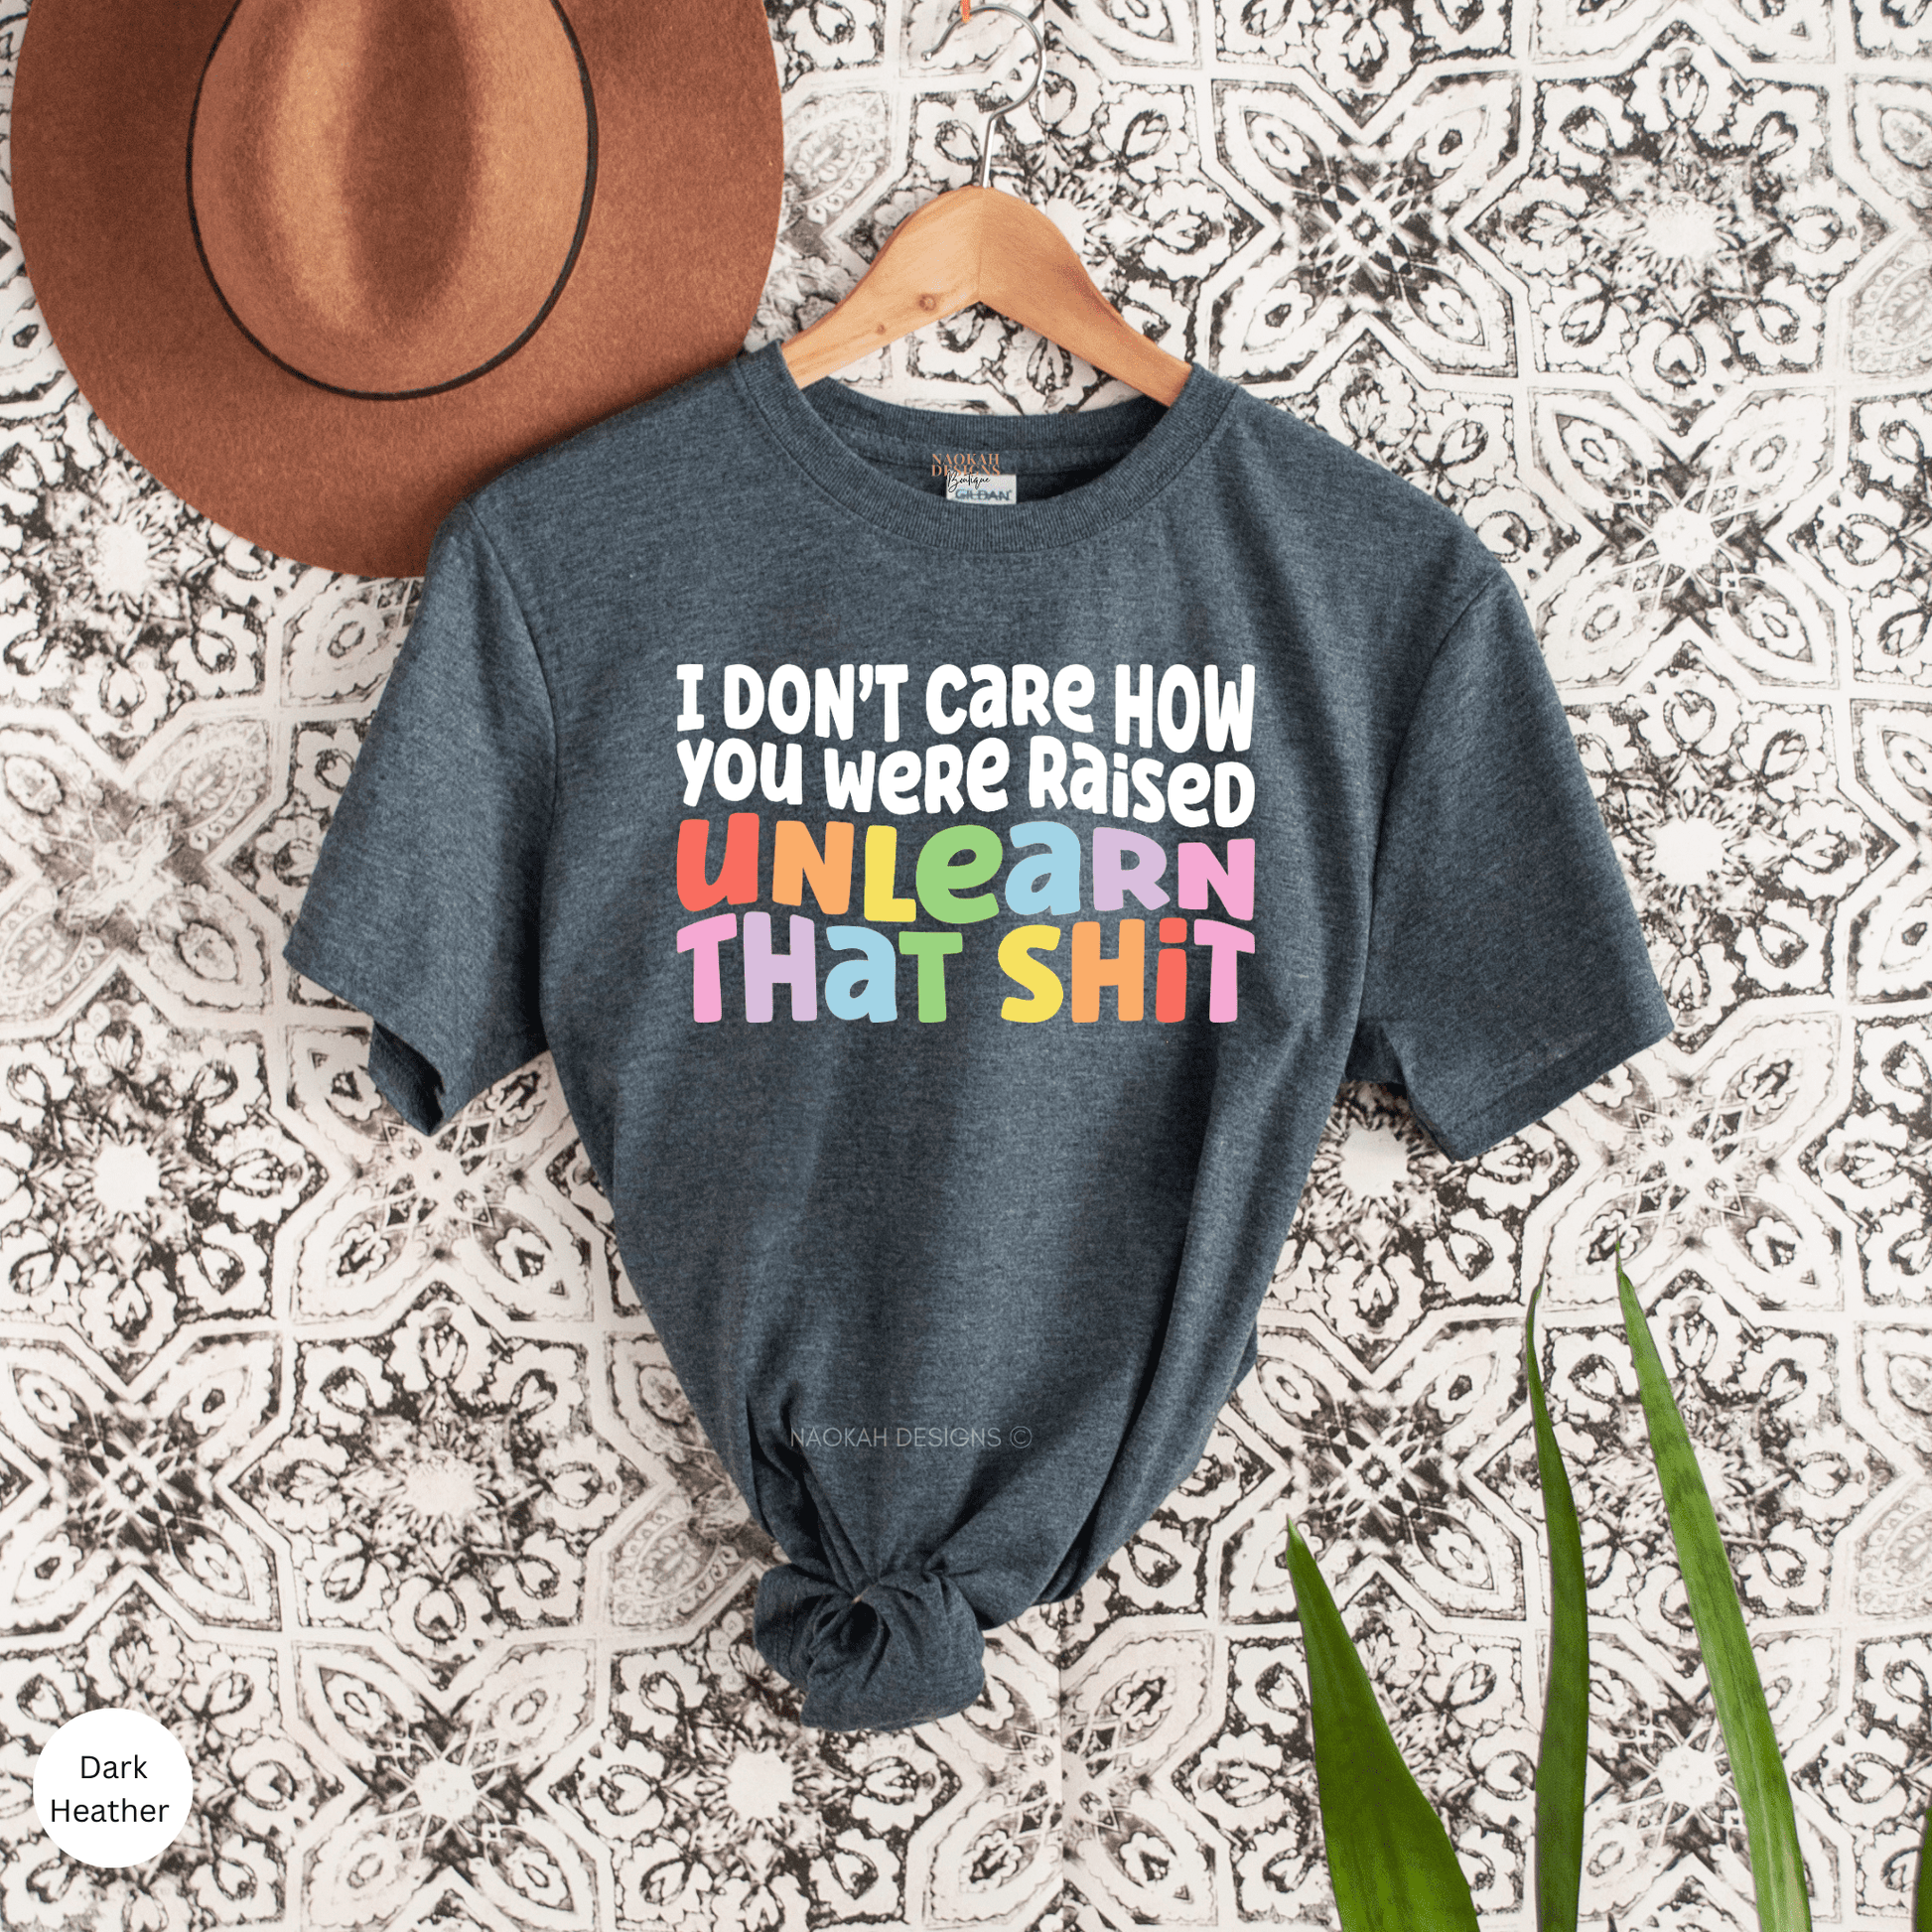 I Don't Care How You Were Raised Unlearn That Shit Shirt, Human Rights, Pride Shirt, Trans Pride, Equal Rights, Rainbow Pride Shirt, Indigenous Heritage Month, Indigenous History Month, Indigenous owned shop, Indigenous Peoples Day Shirt